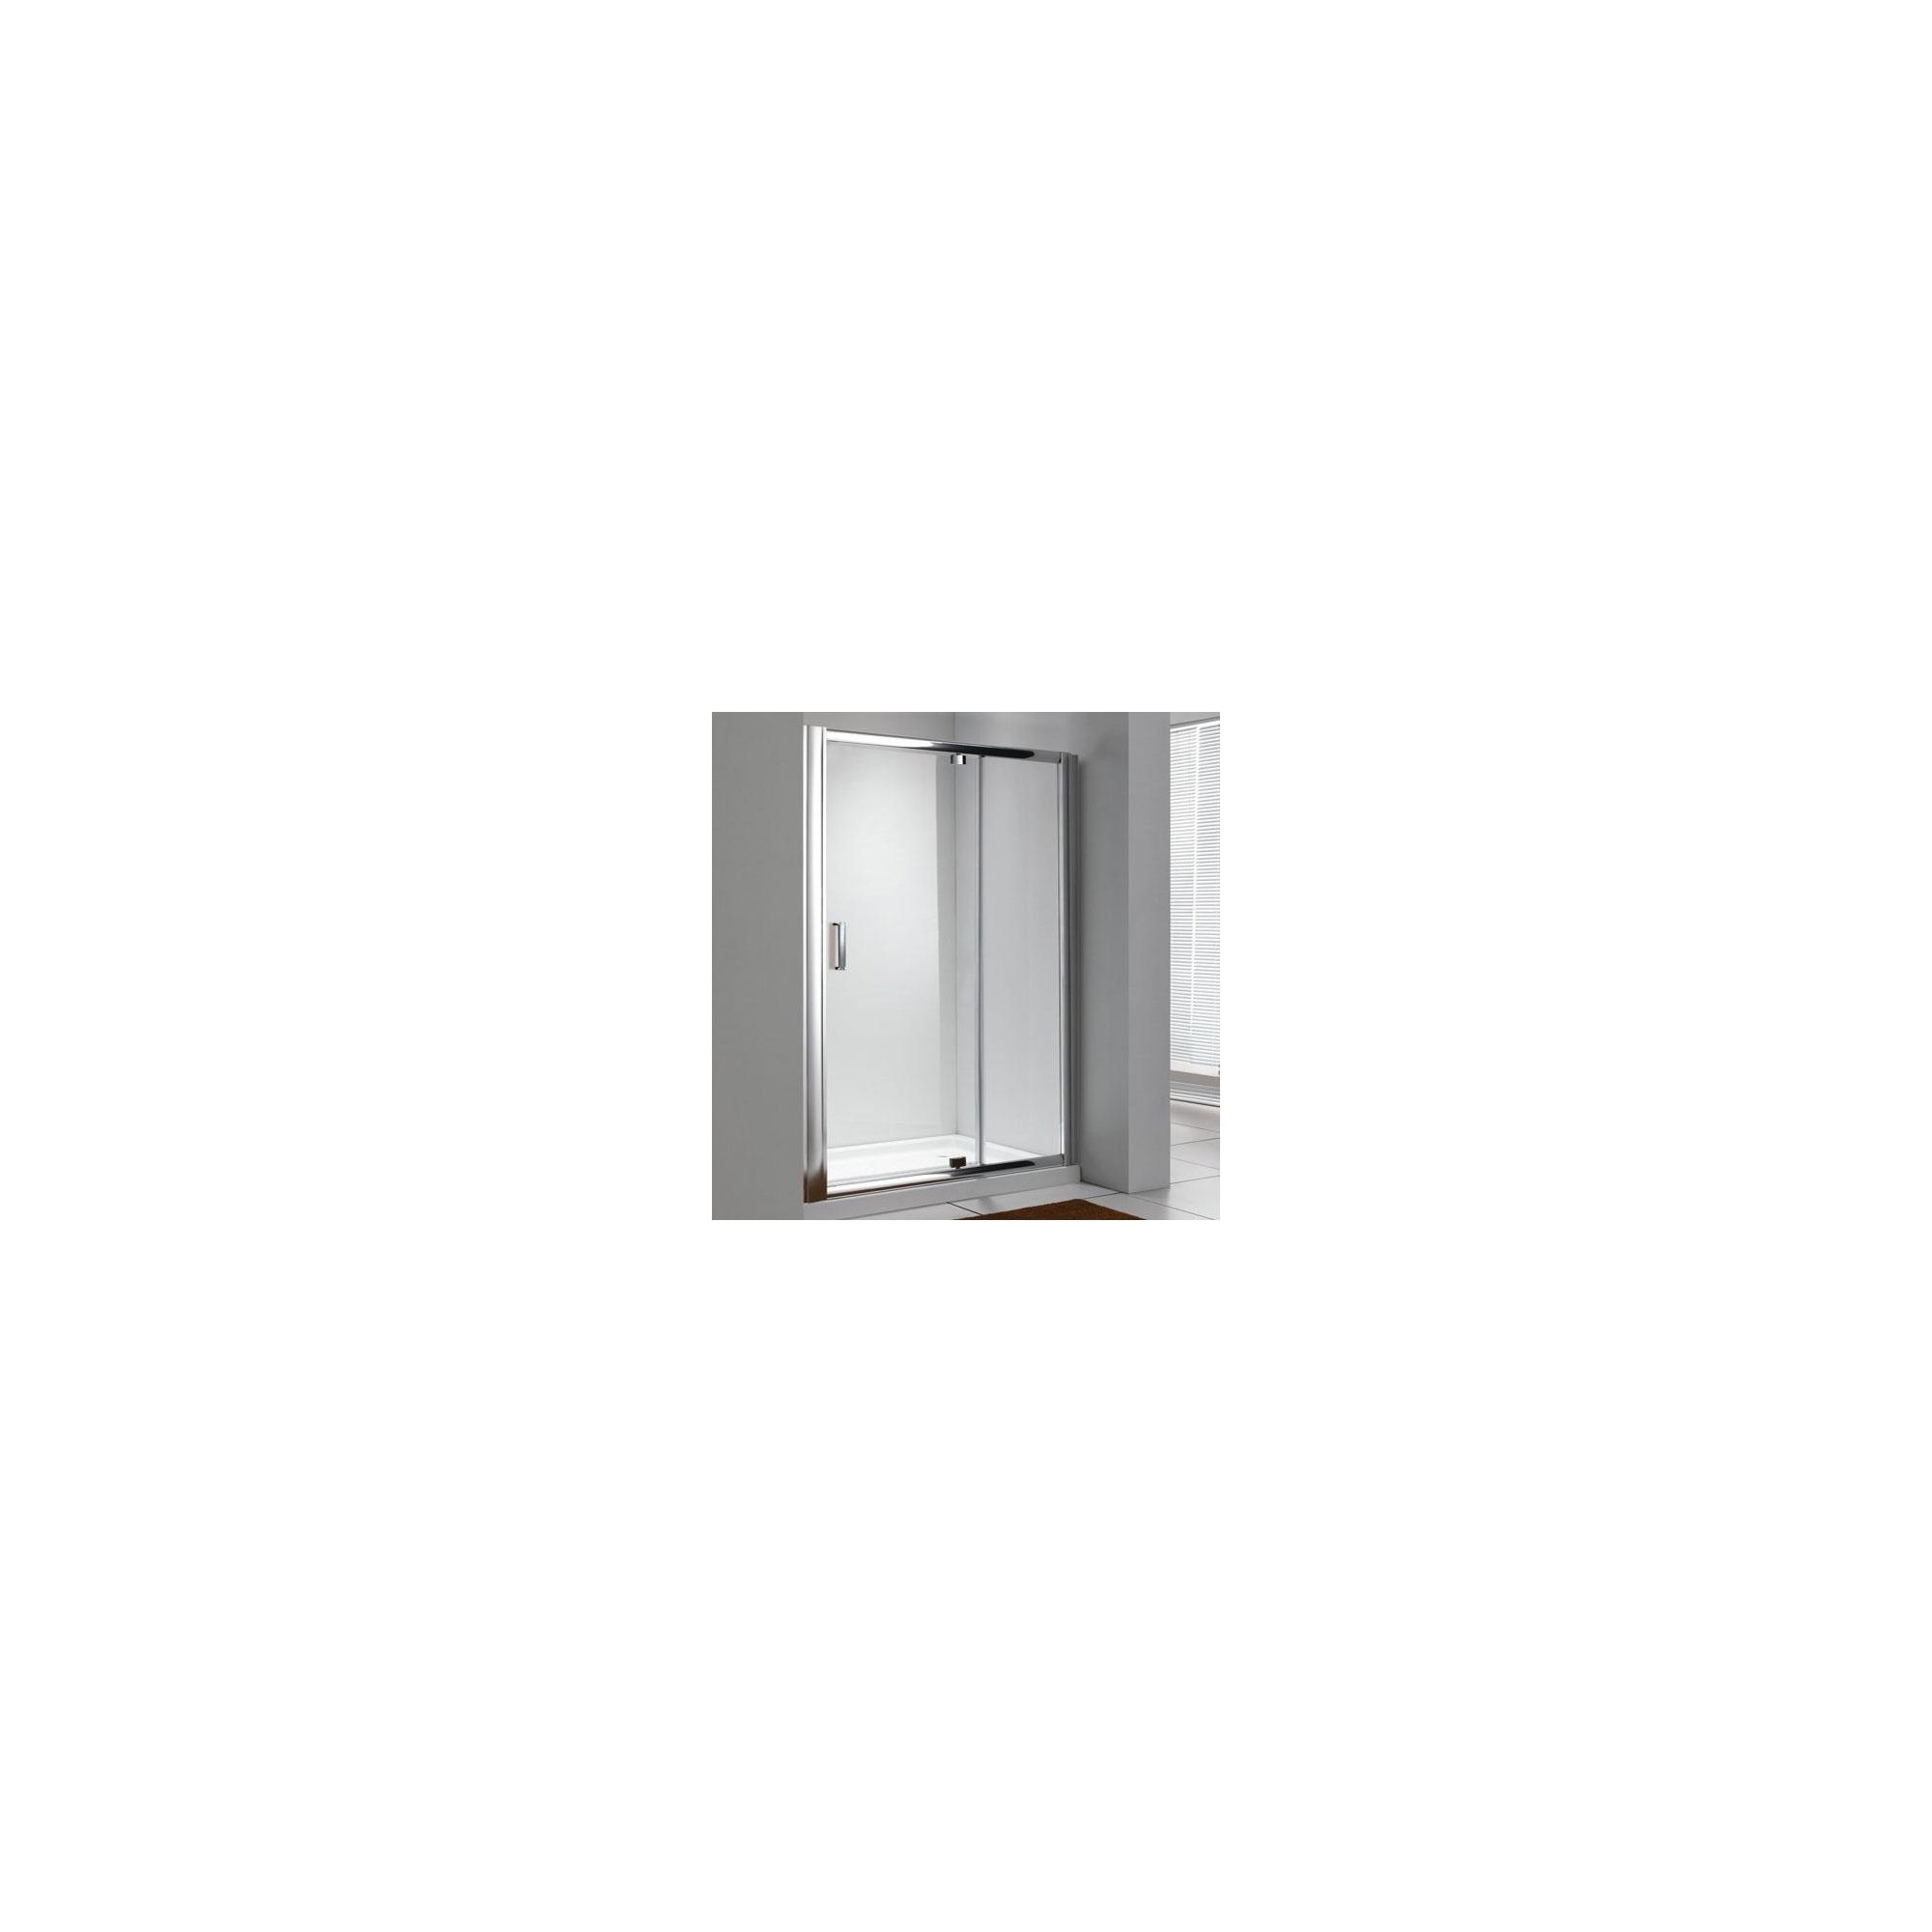 Duchy Style Pivot Door Shower Enclosure, 800mm x 700mm, 6mm Glass, Low Profile Tray at Tescos Direct